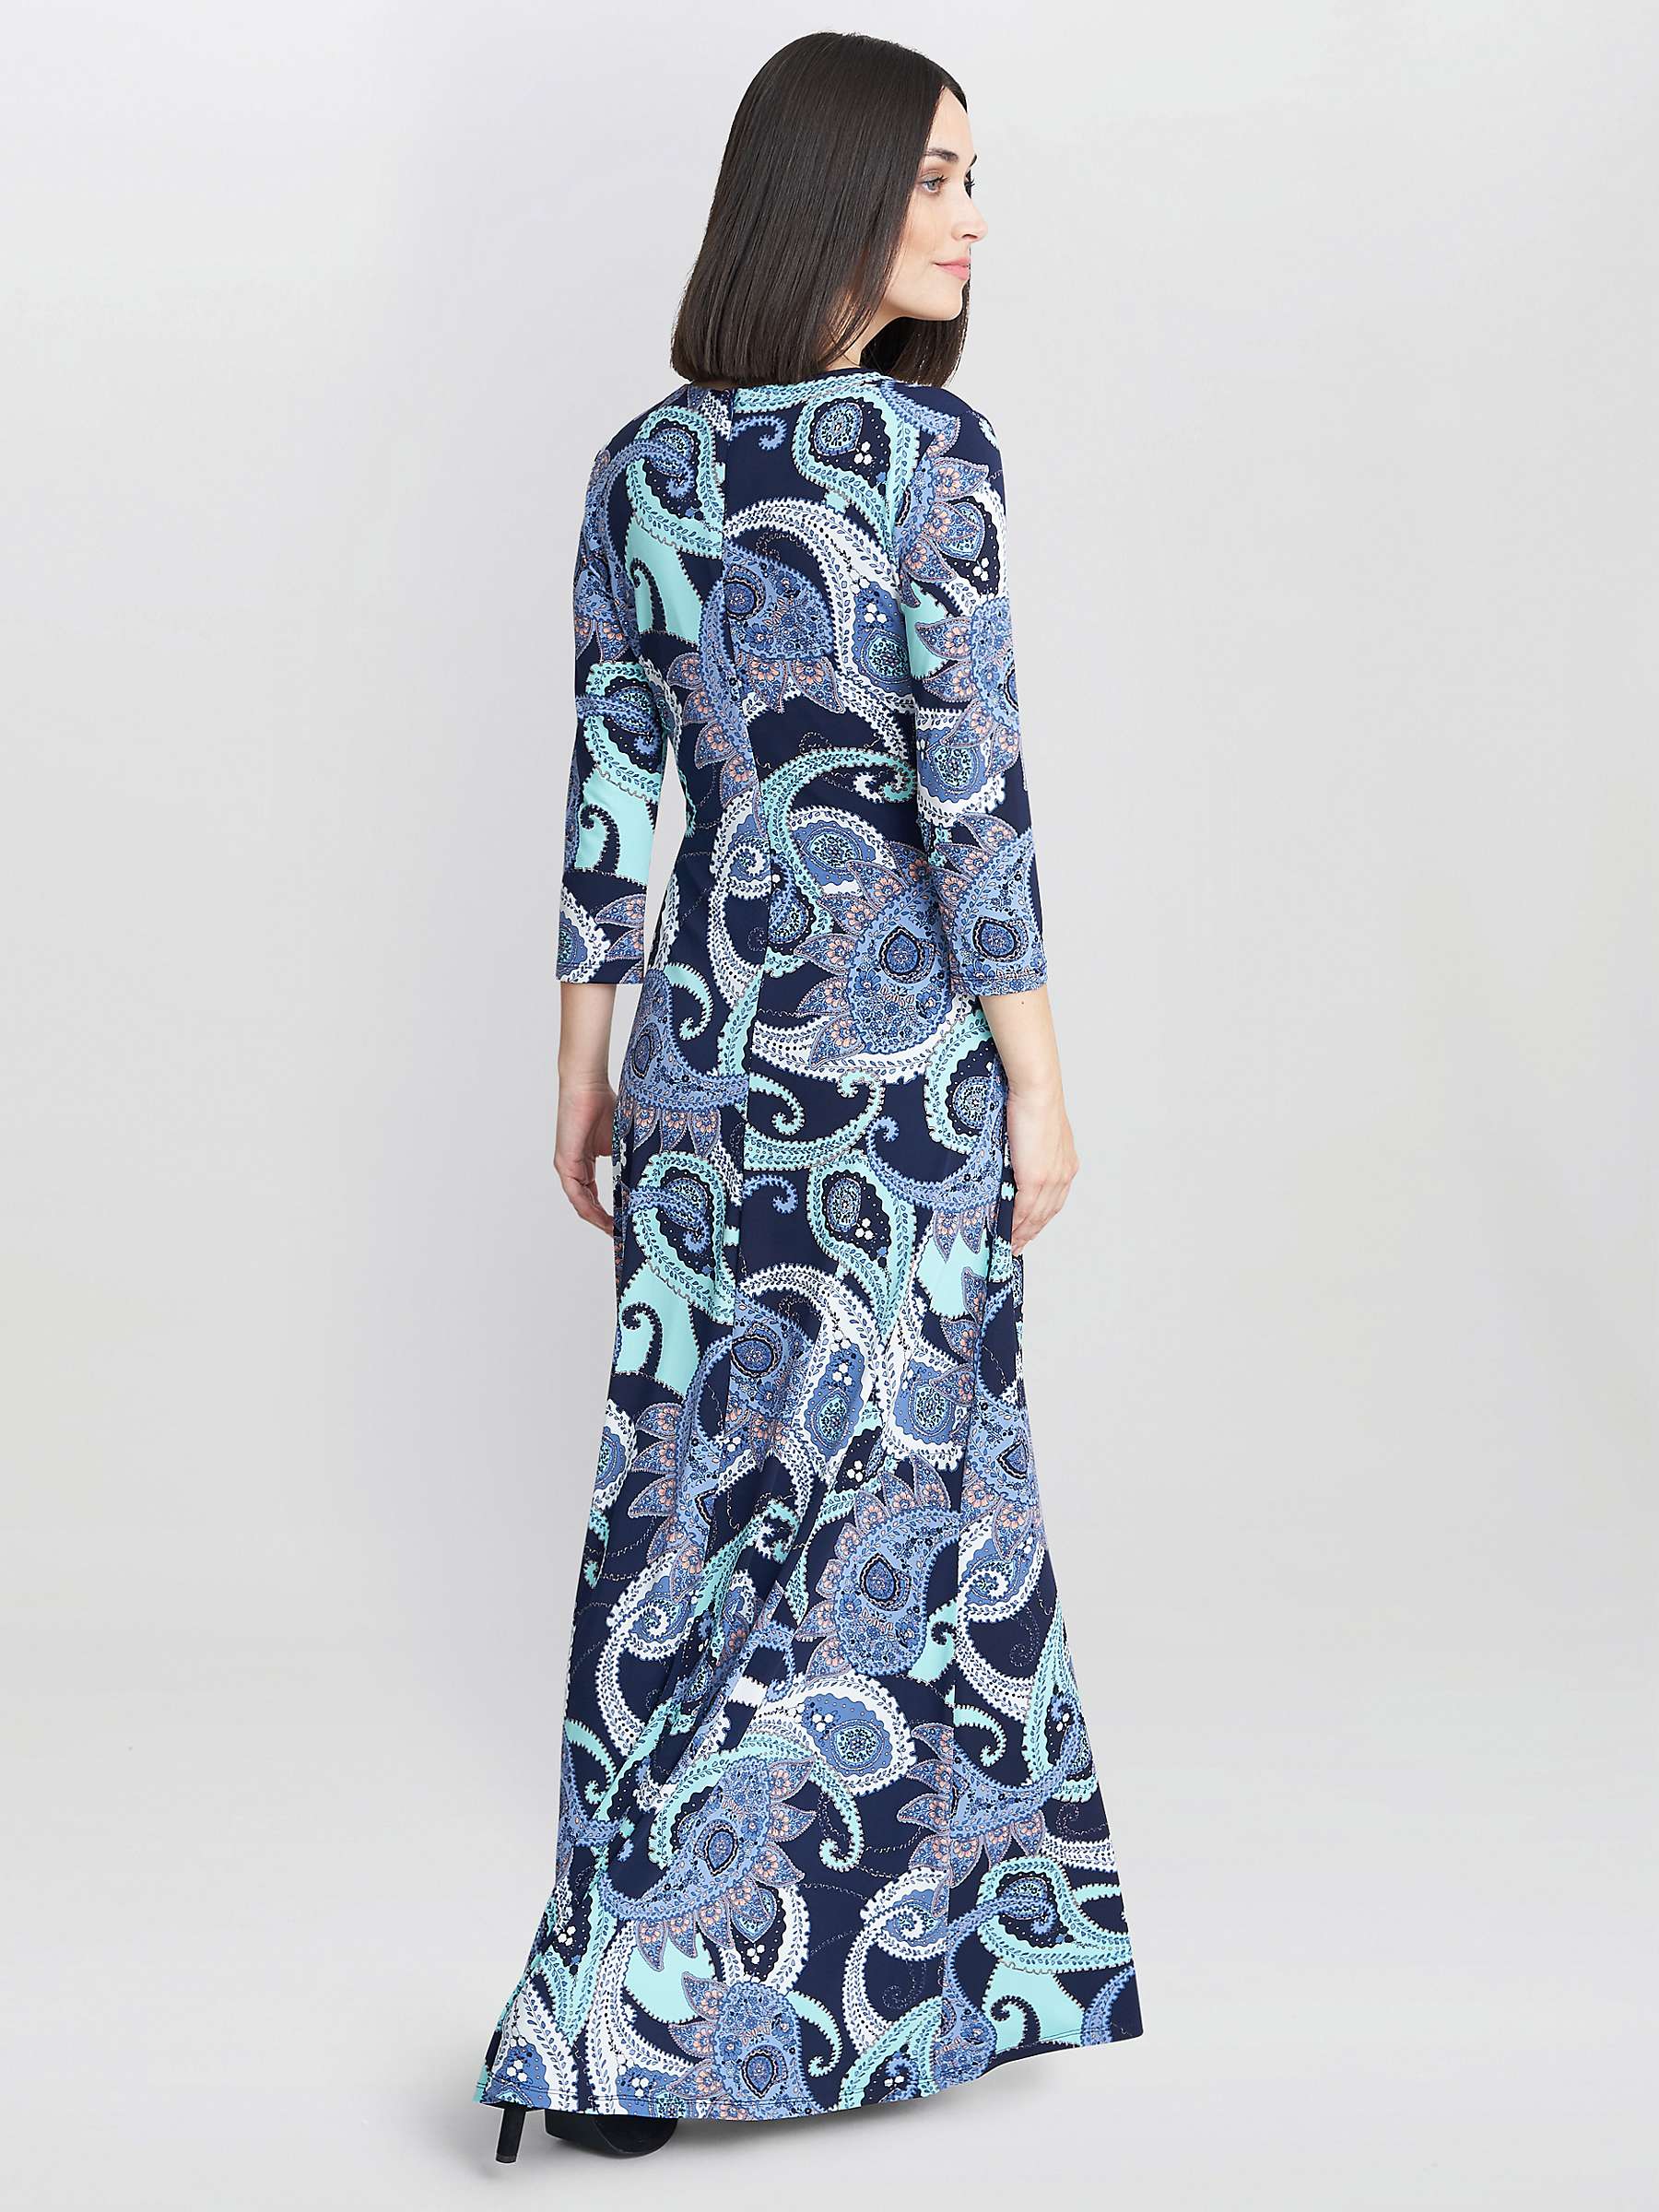 Buy Gina Bacconi Danielle Jersey Wrap Maxi Dress, Navy/Green Online at johnlewis.com